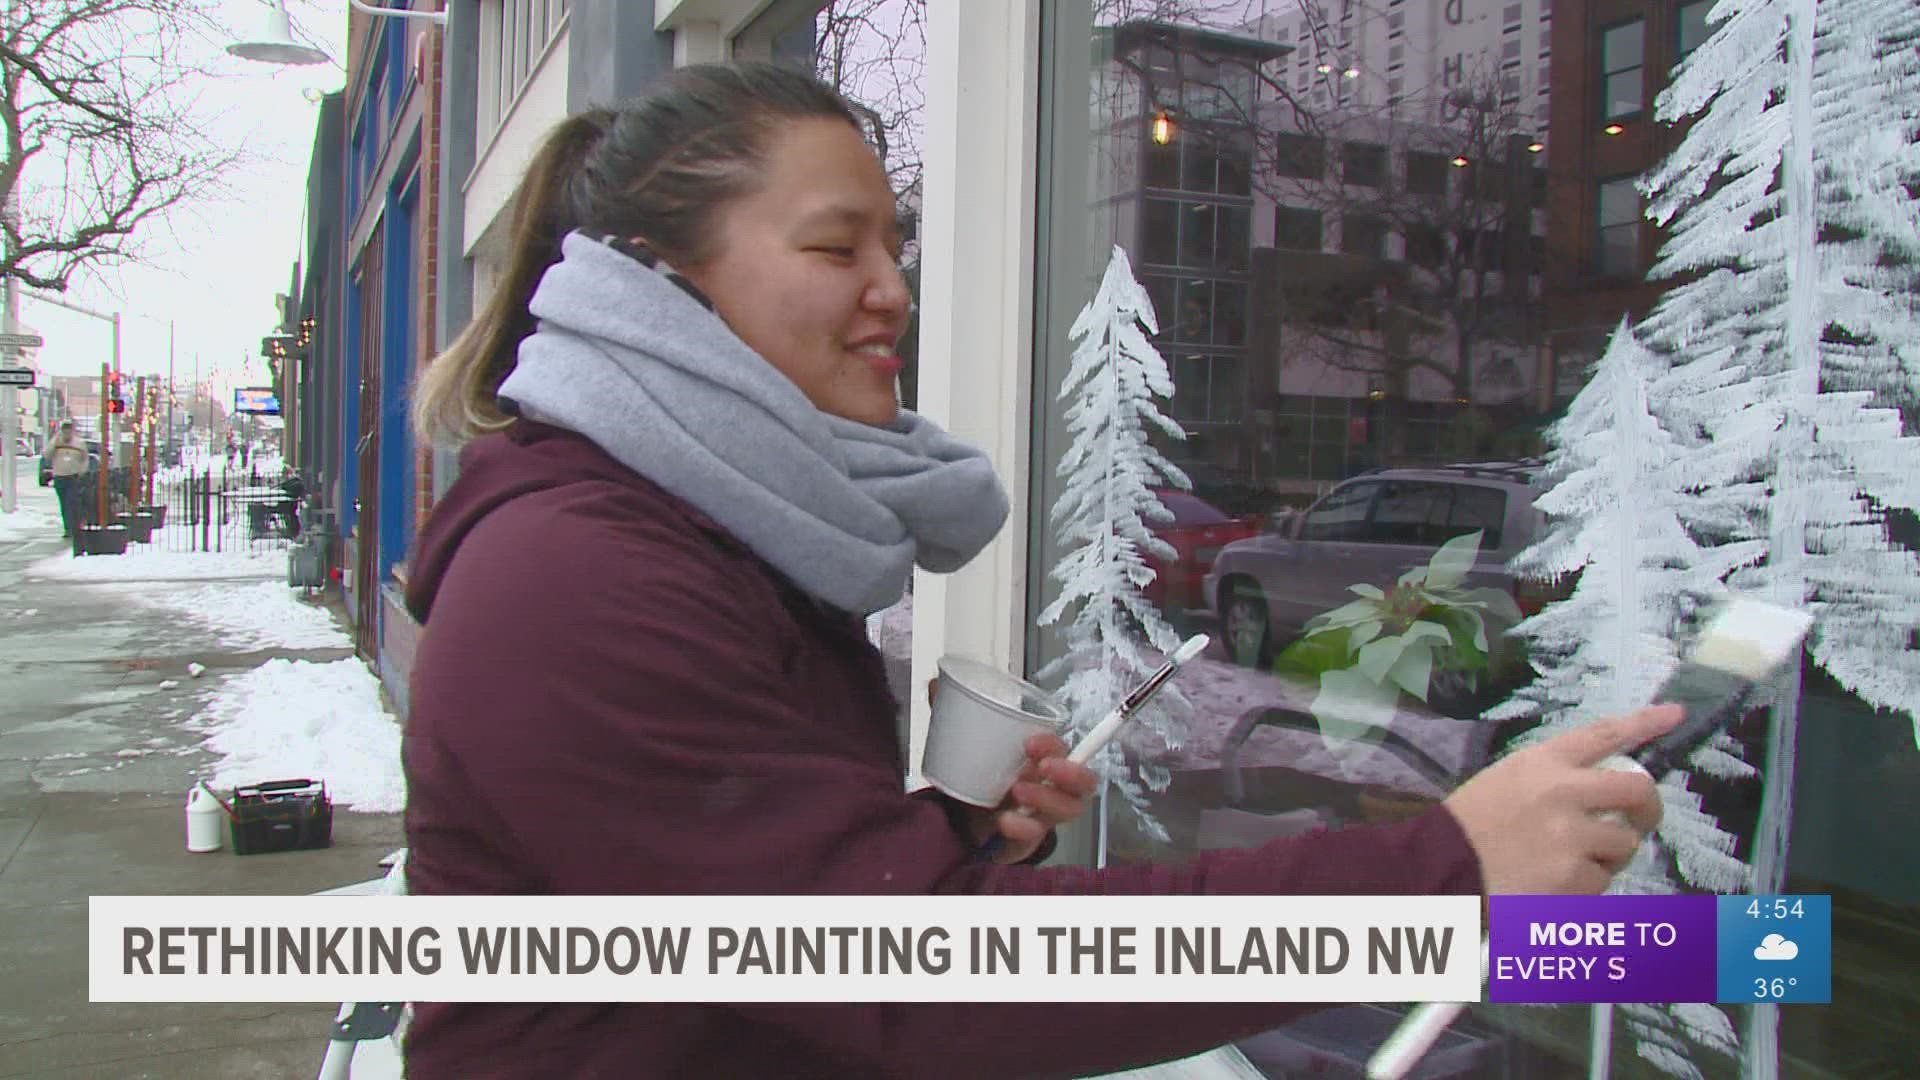 Local artist Cat Kailani is doing her part to keep window painting alive in the Inland Northwest.